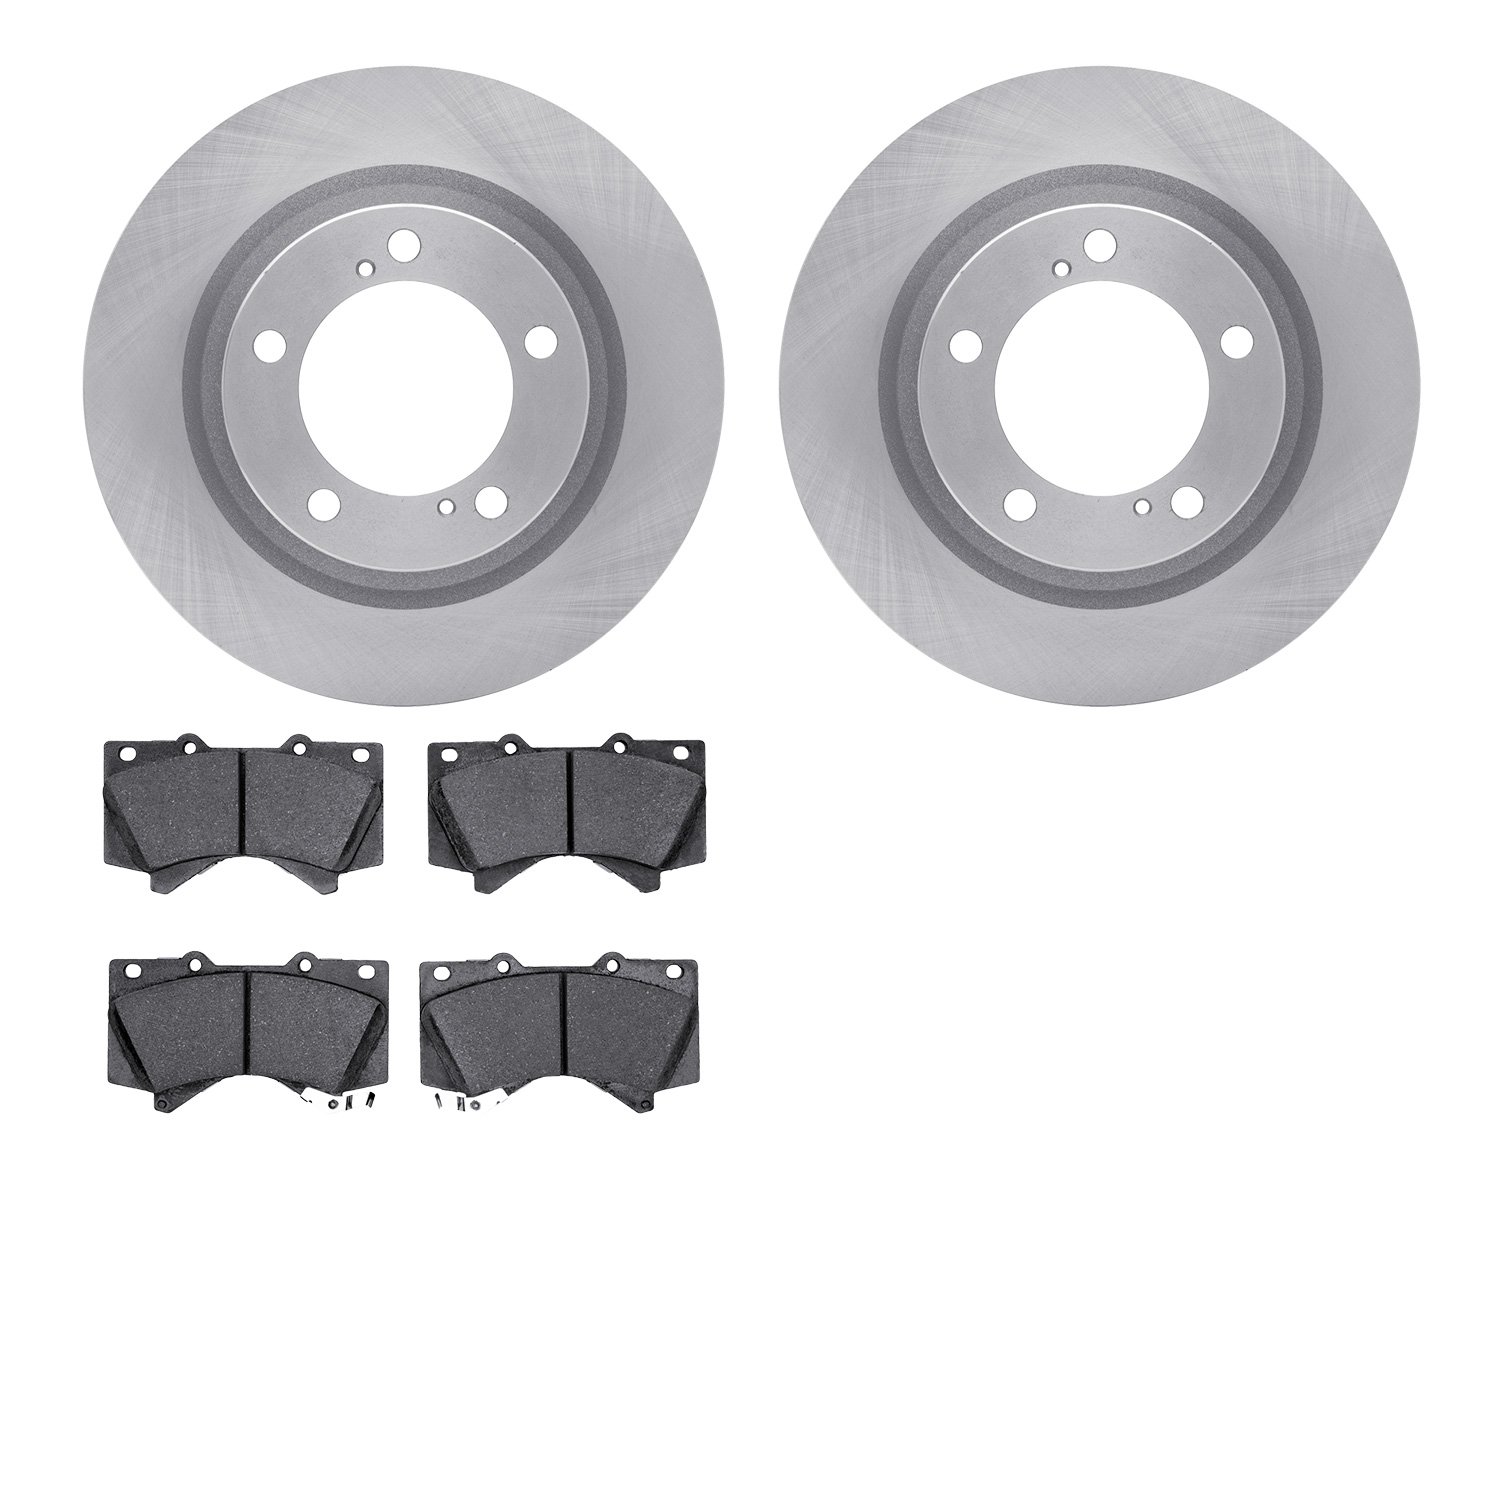 6302-76161 Brake Rotors with 3000-Series Ceramic Brake Pads Kit, Fits Select Lexus/Toyota/Scion, Position: Front